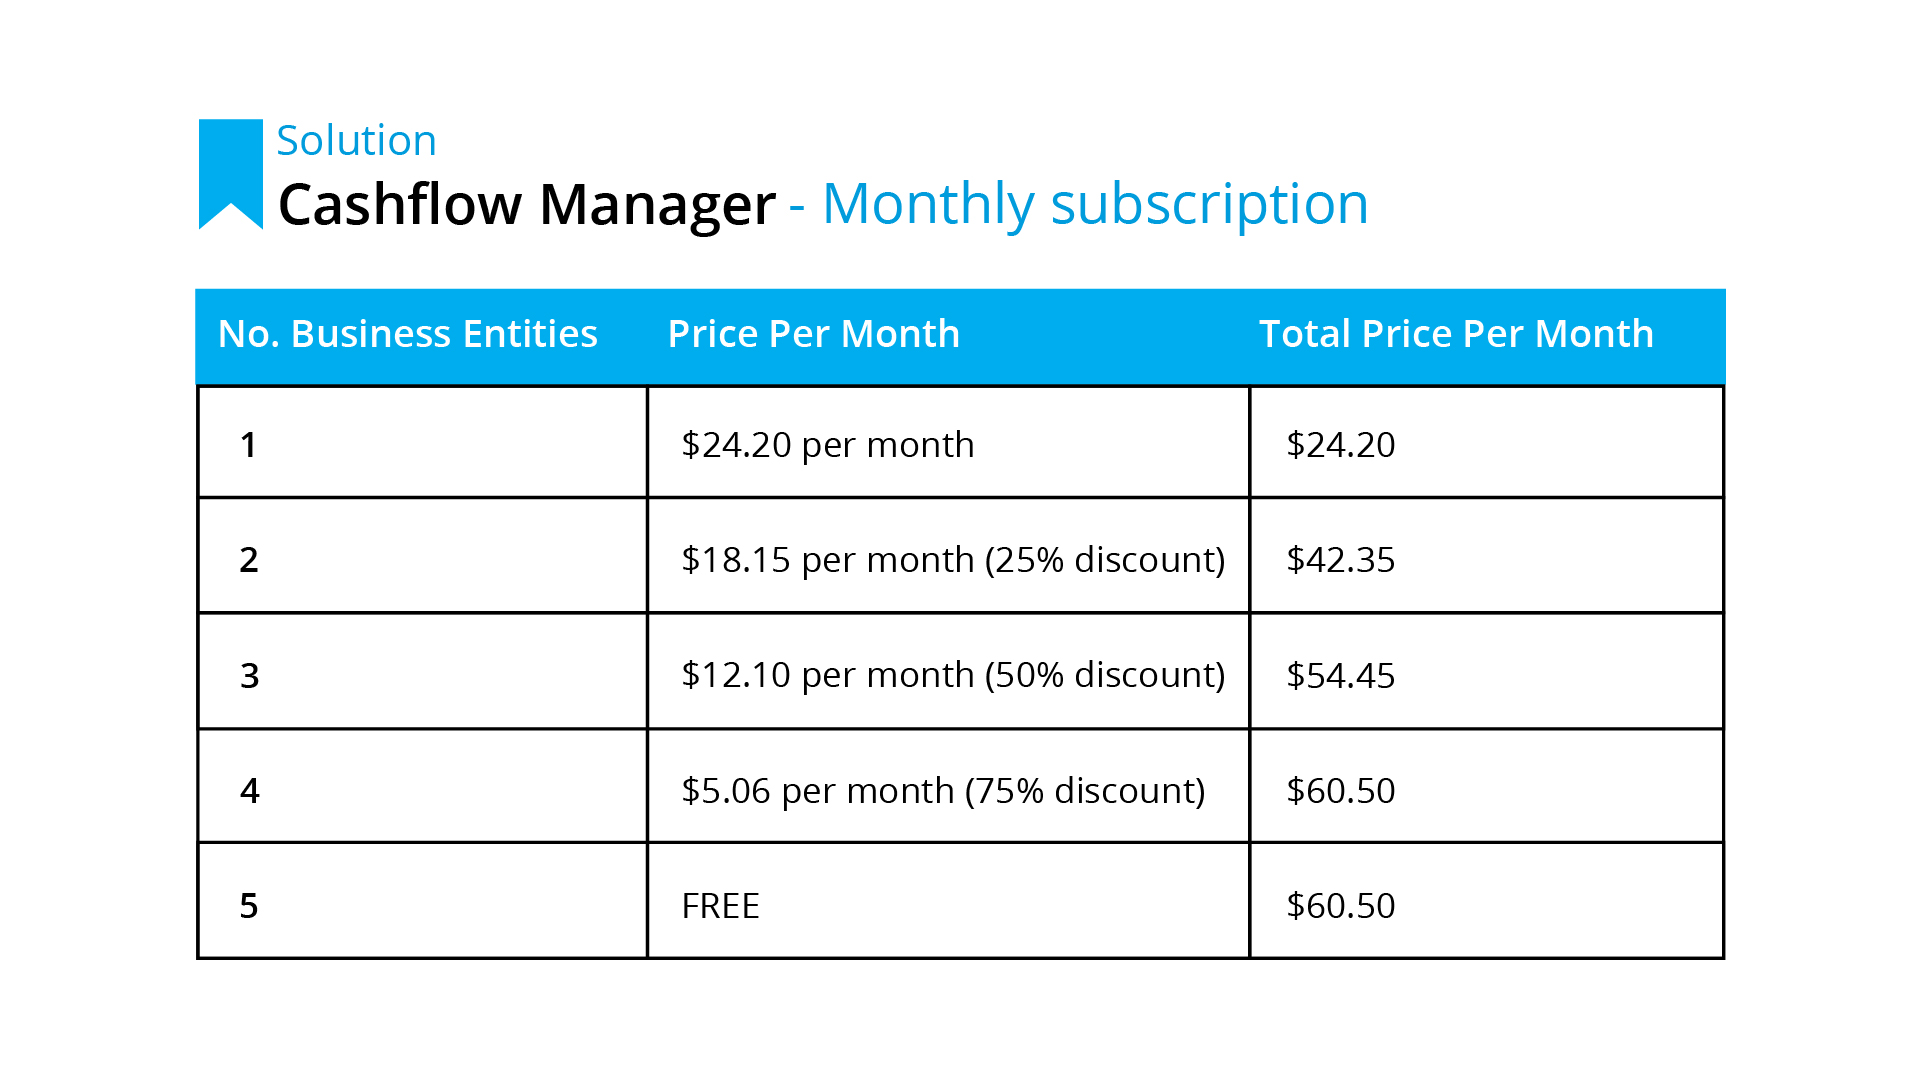 Cashflow Manager - monthly subscription